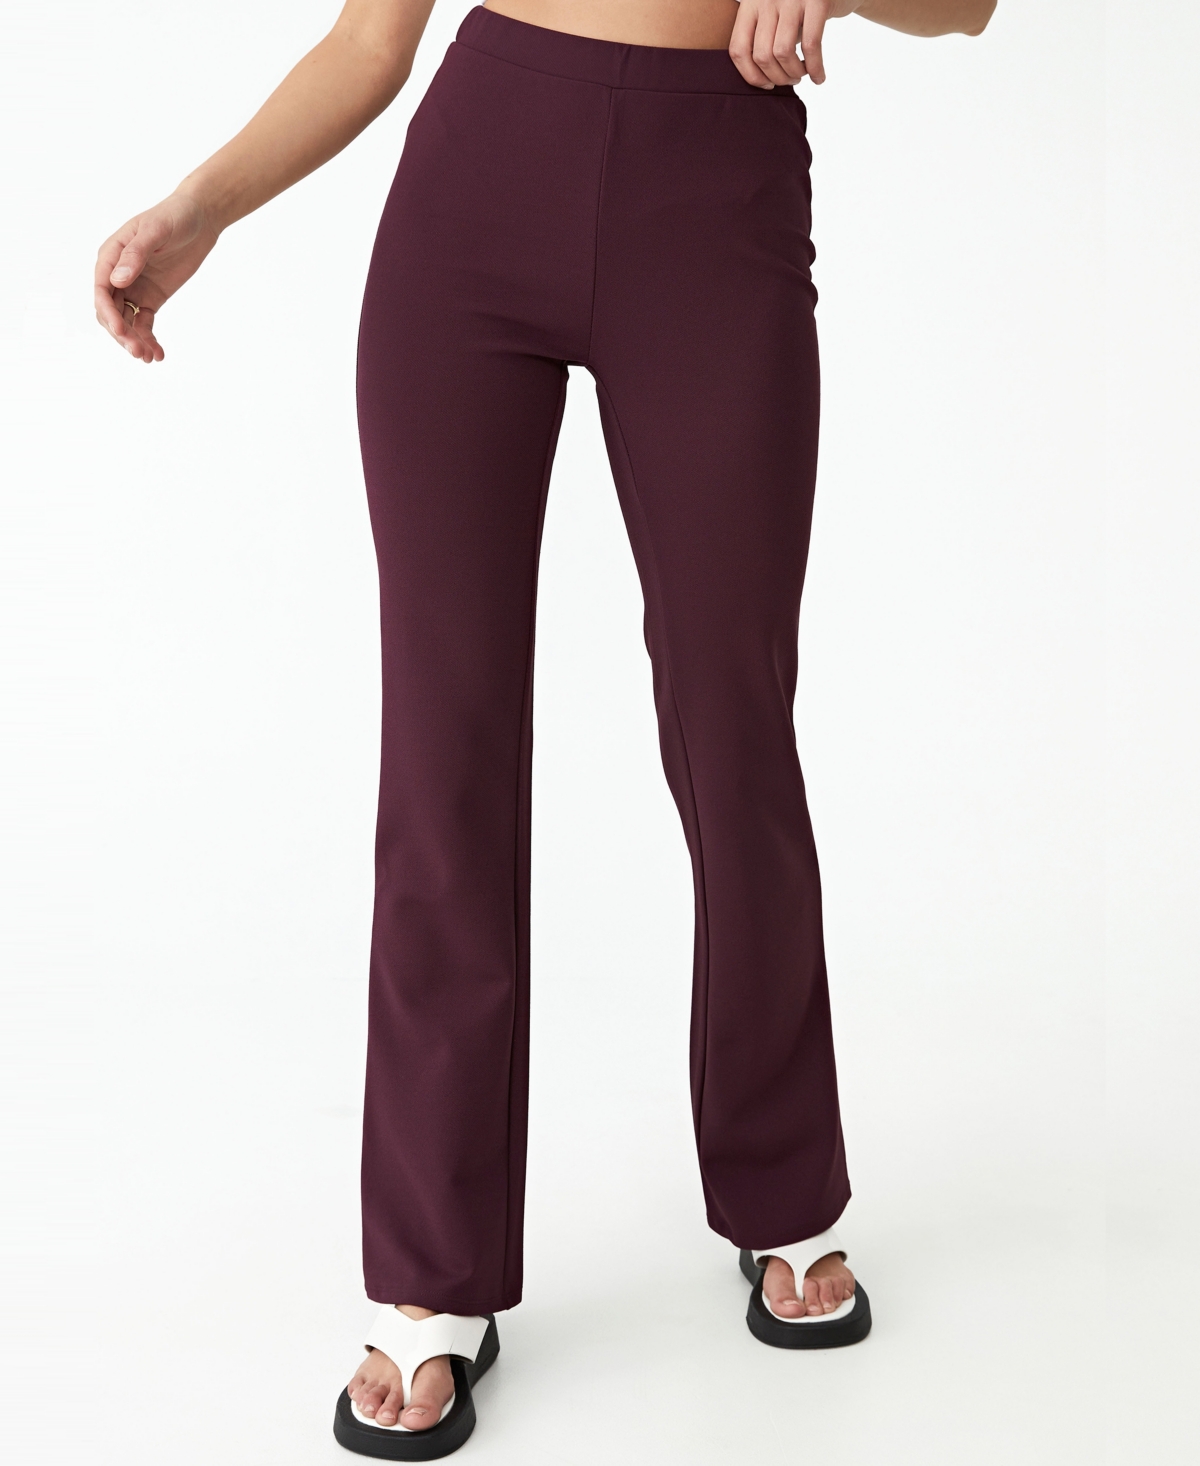 Cotton On Women's Pull On Flare Pant